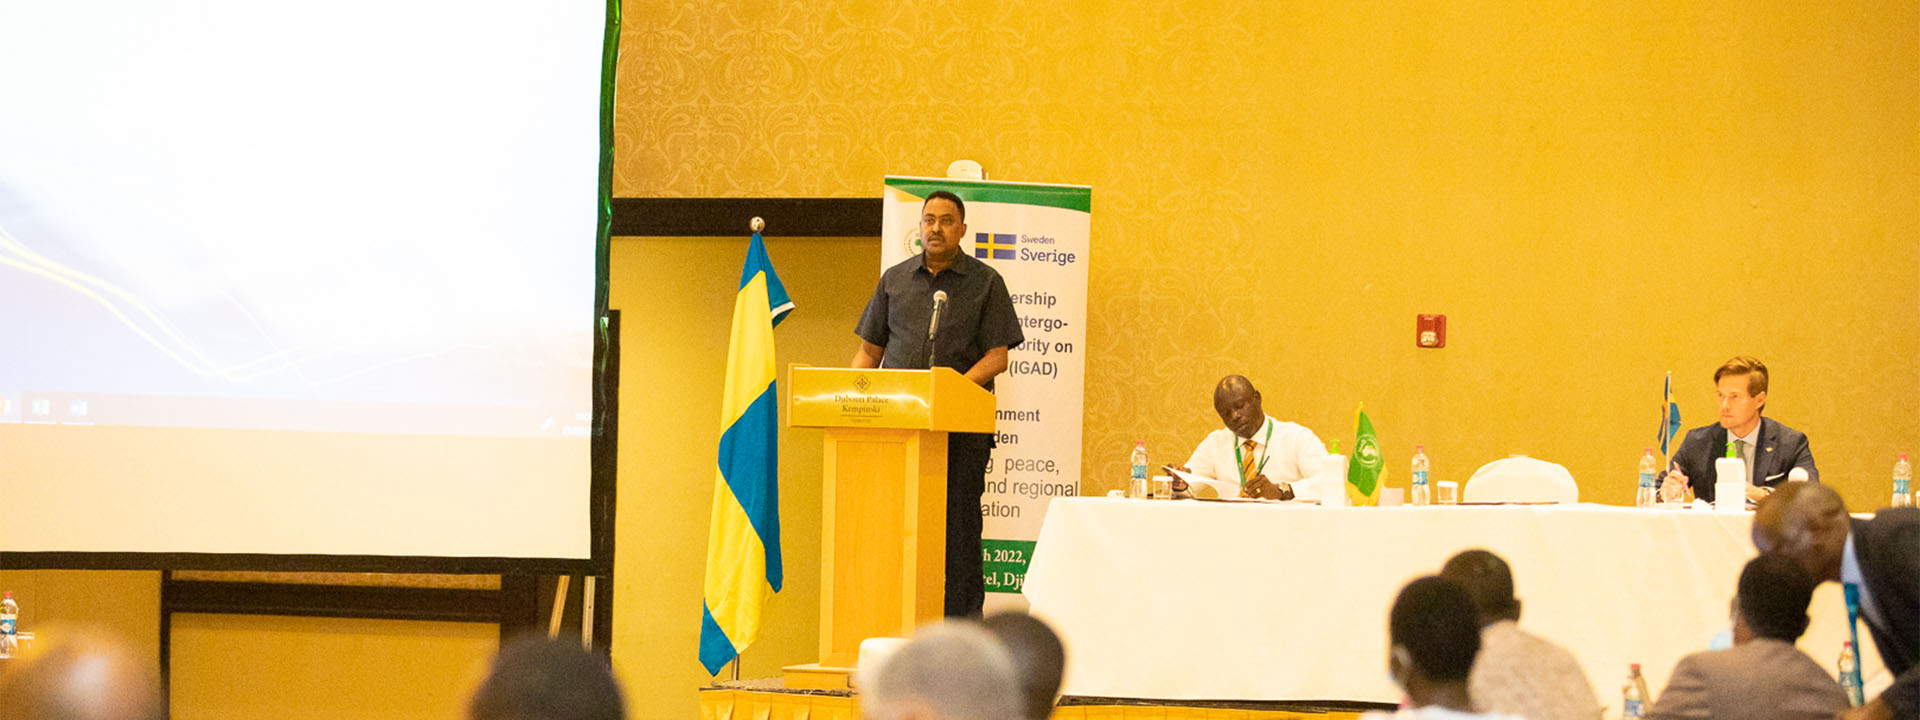 Official Remarks by Dr. Workneh Gebeyehu, IGAD Executive Secretary at the  2nd ANNUAL IGAD/SWEDEN PARTNERSHIP MEETING Wednesday, 23rd MARCH 2O22